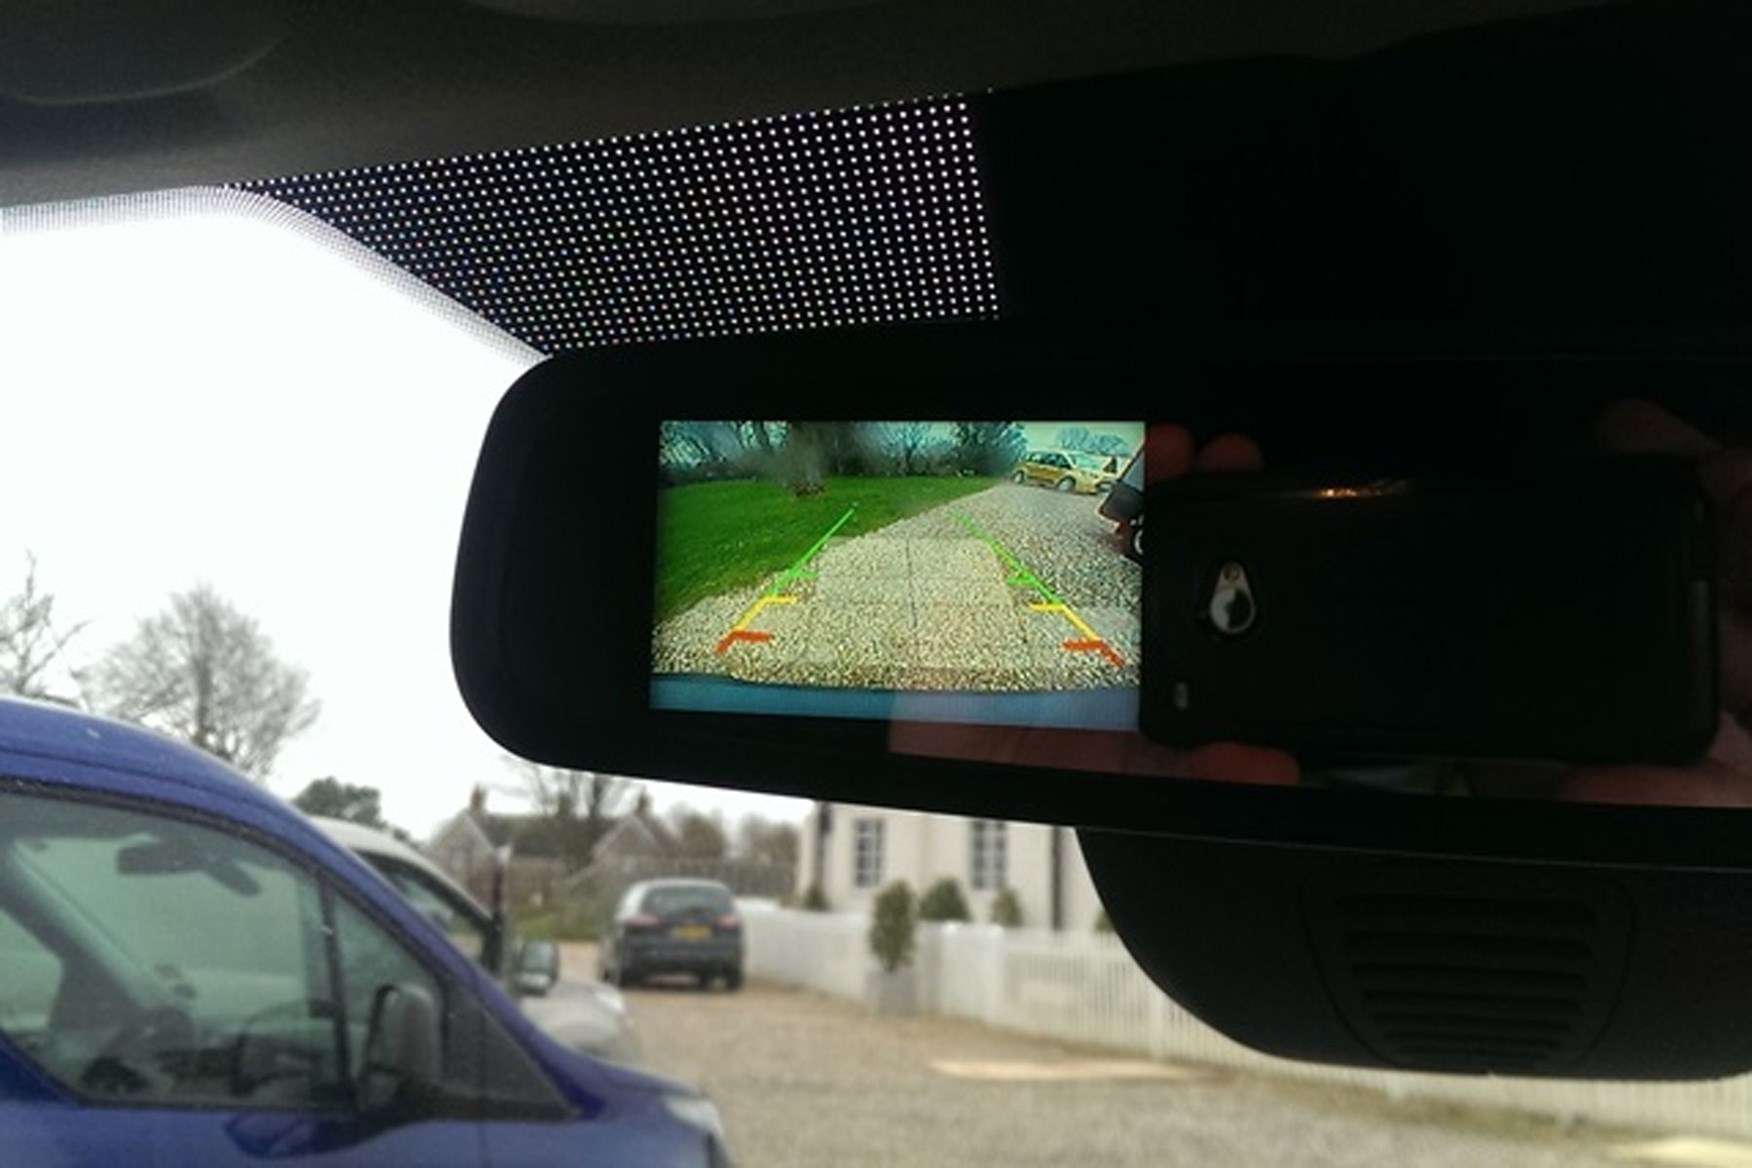 Ford Transit Connect review - 2013 Trend rear view camera in mirror